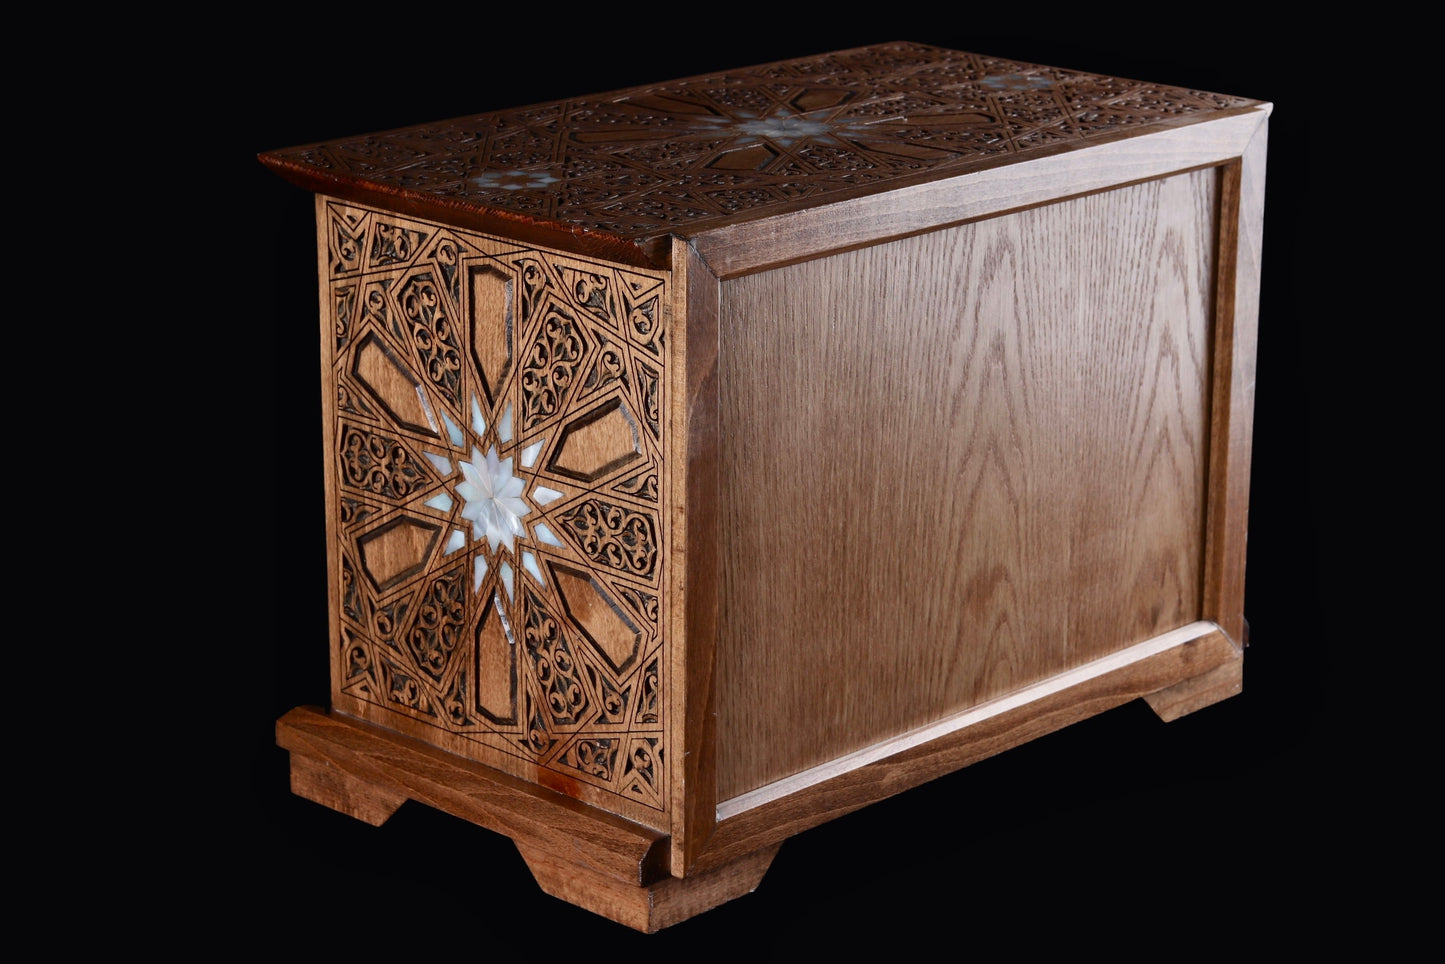 Jewelery Box - Carved and inlayed